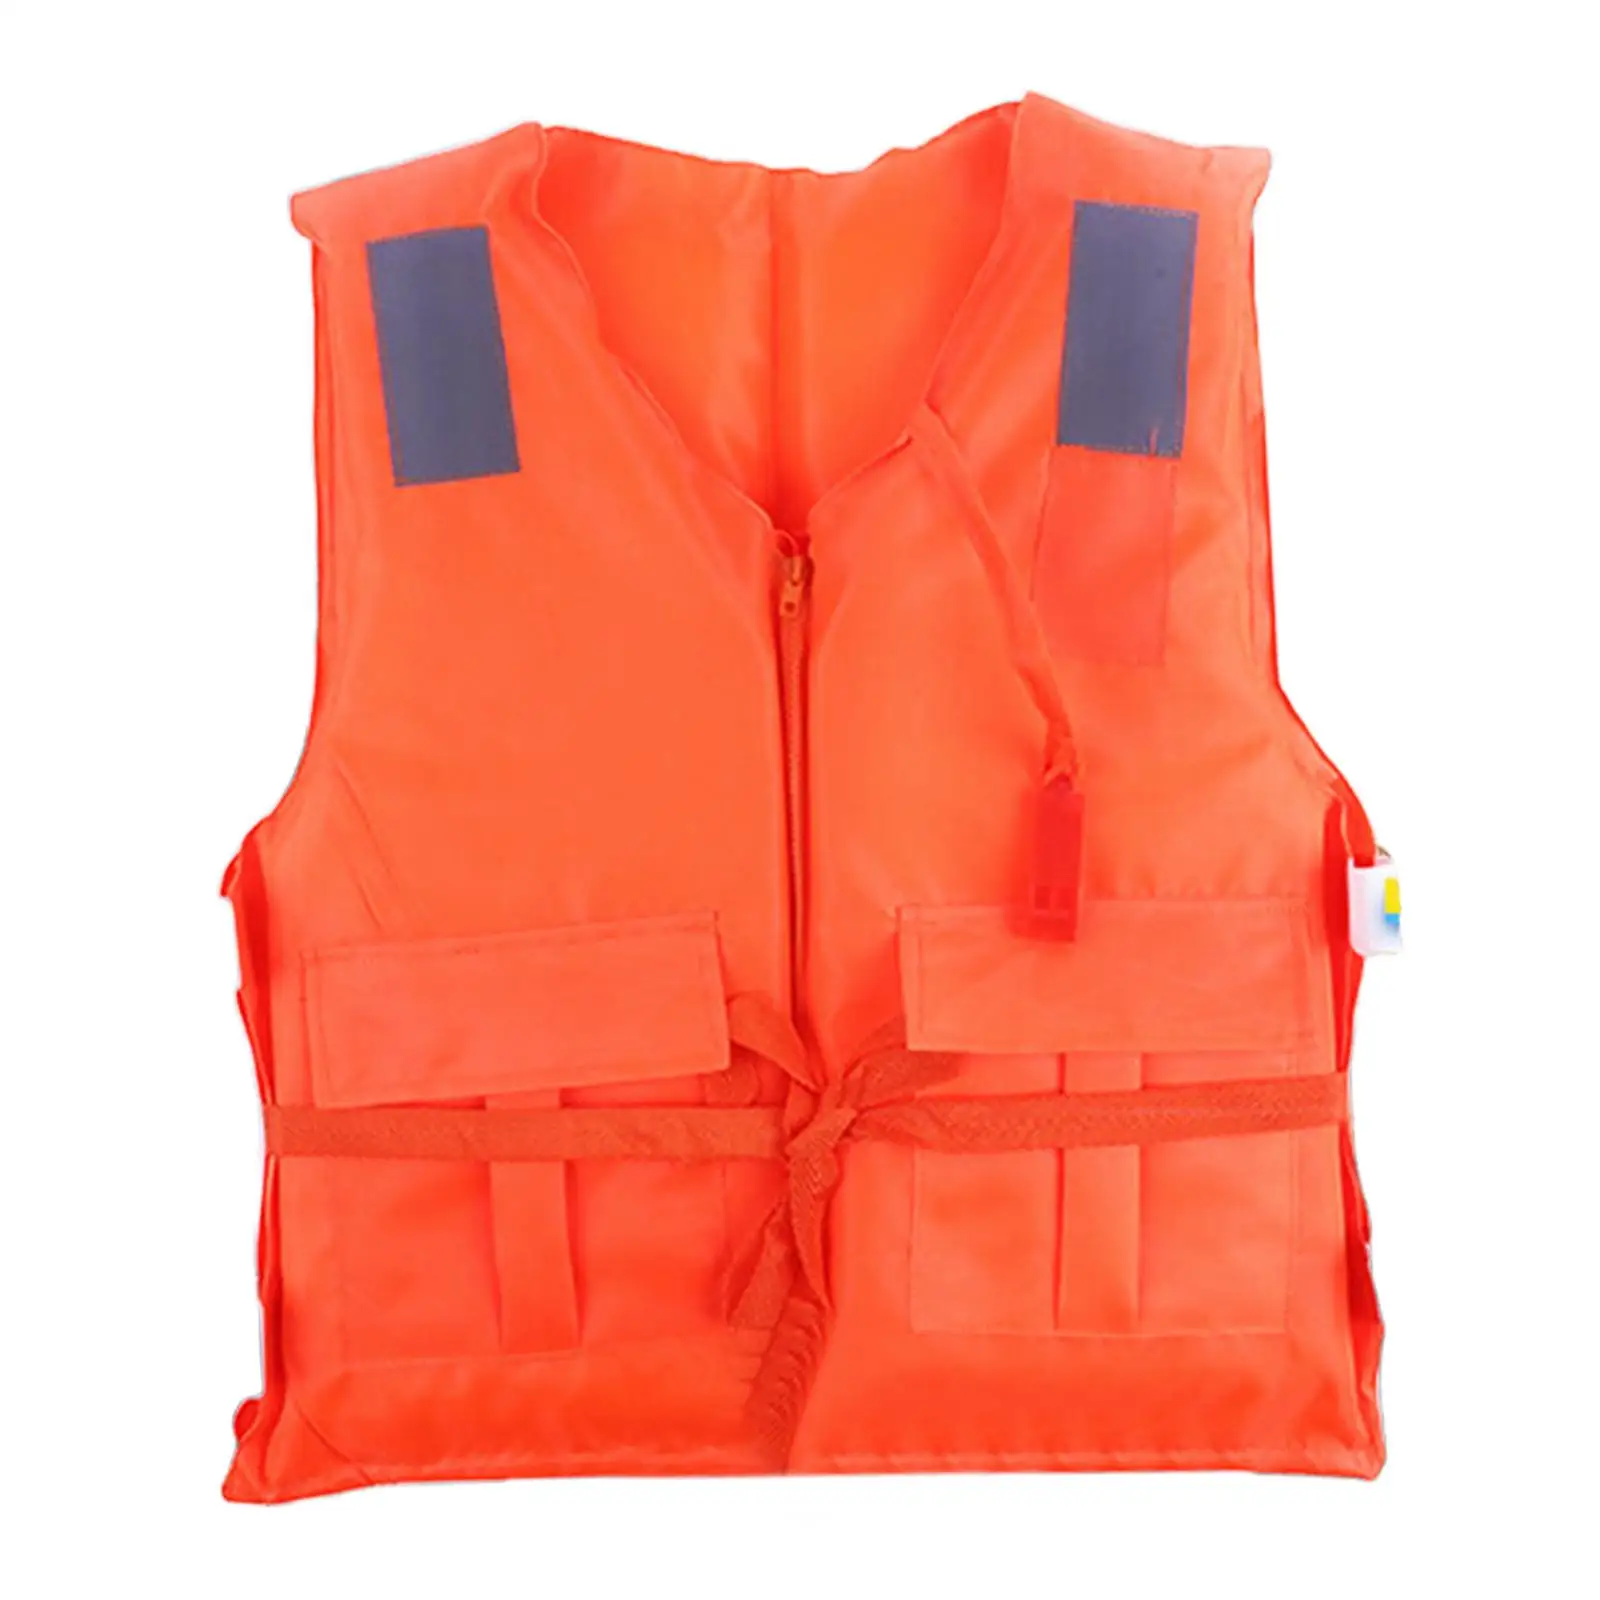 

Drifting Life Jacket Swimming Life Vest Reflective Adjustable Adults with Whistle for Boating Diving Fishing Kayak Surfing